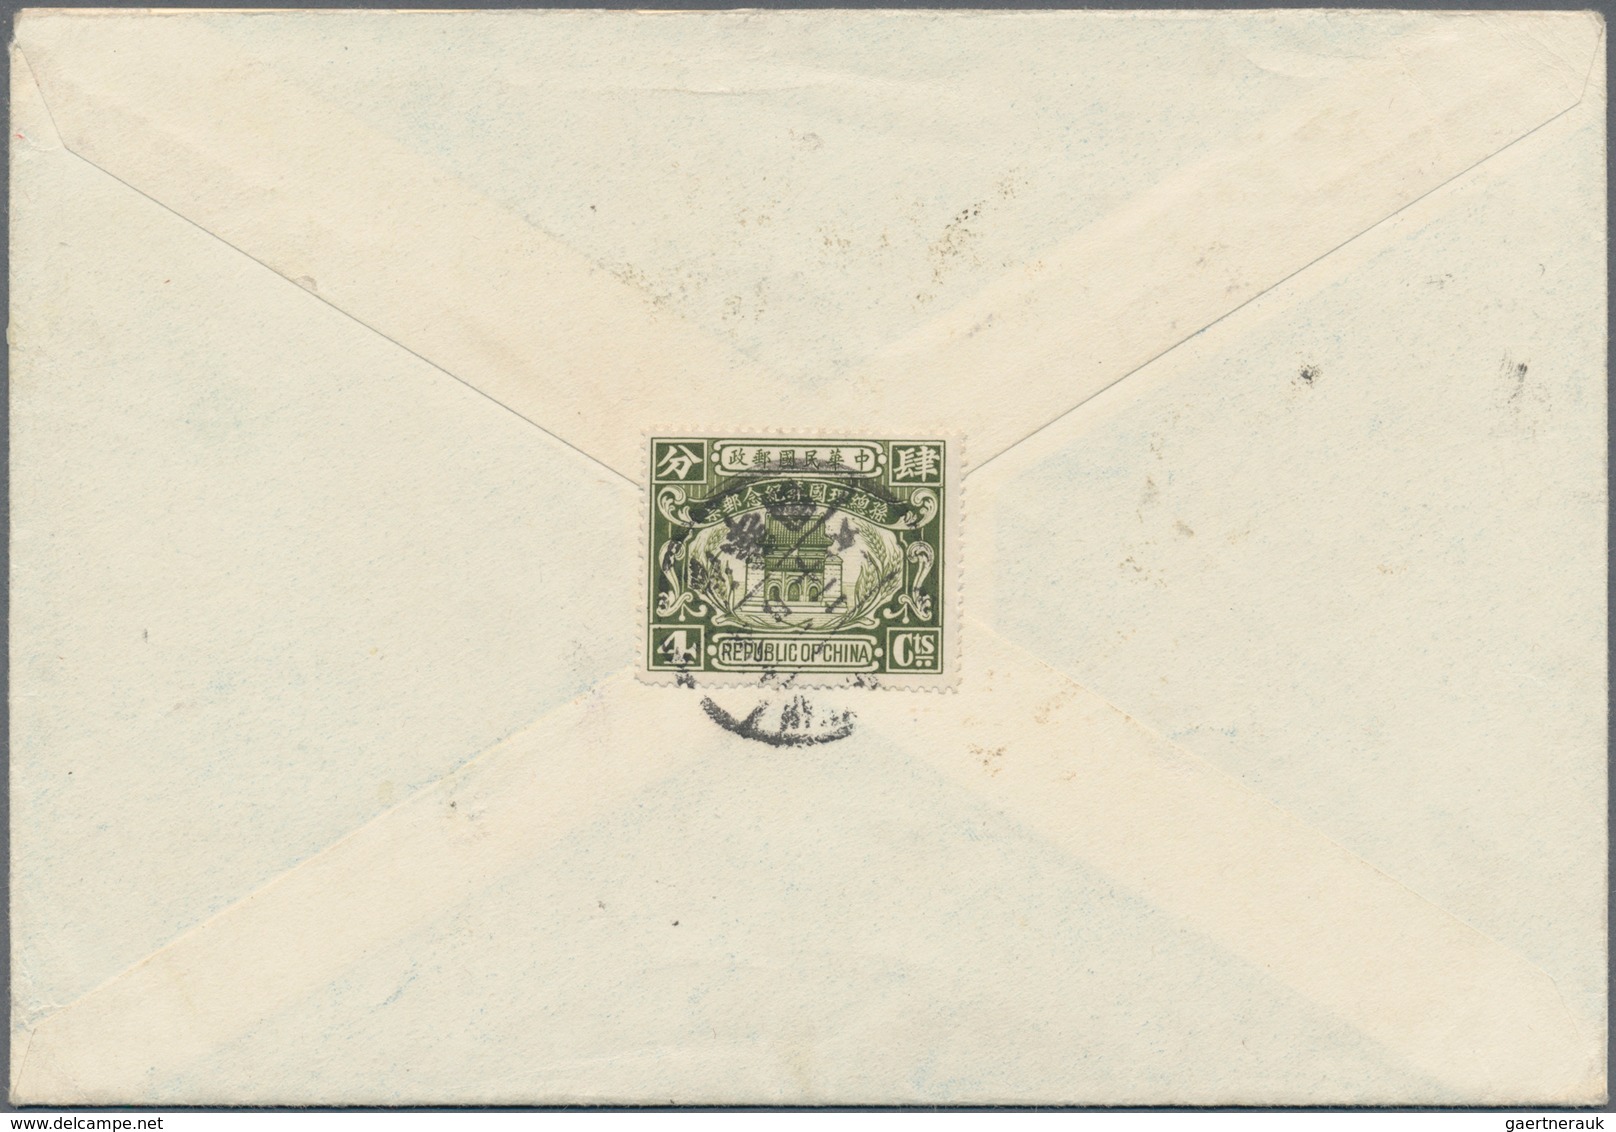 China: 1929, Unification 1 C. (block-6) And Stata Burial 4 C. On Reverse Tied Bilingual "TSINGHUAYÜA - 1912-1949 République